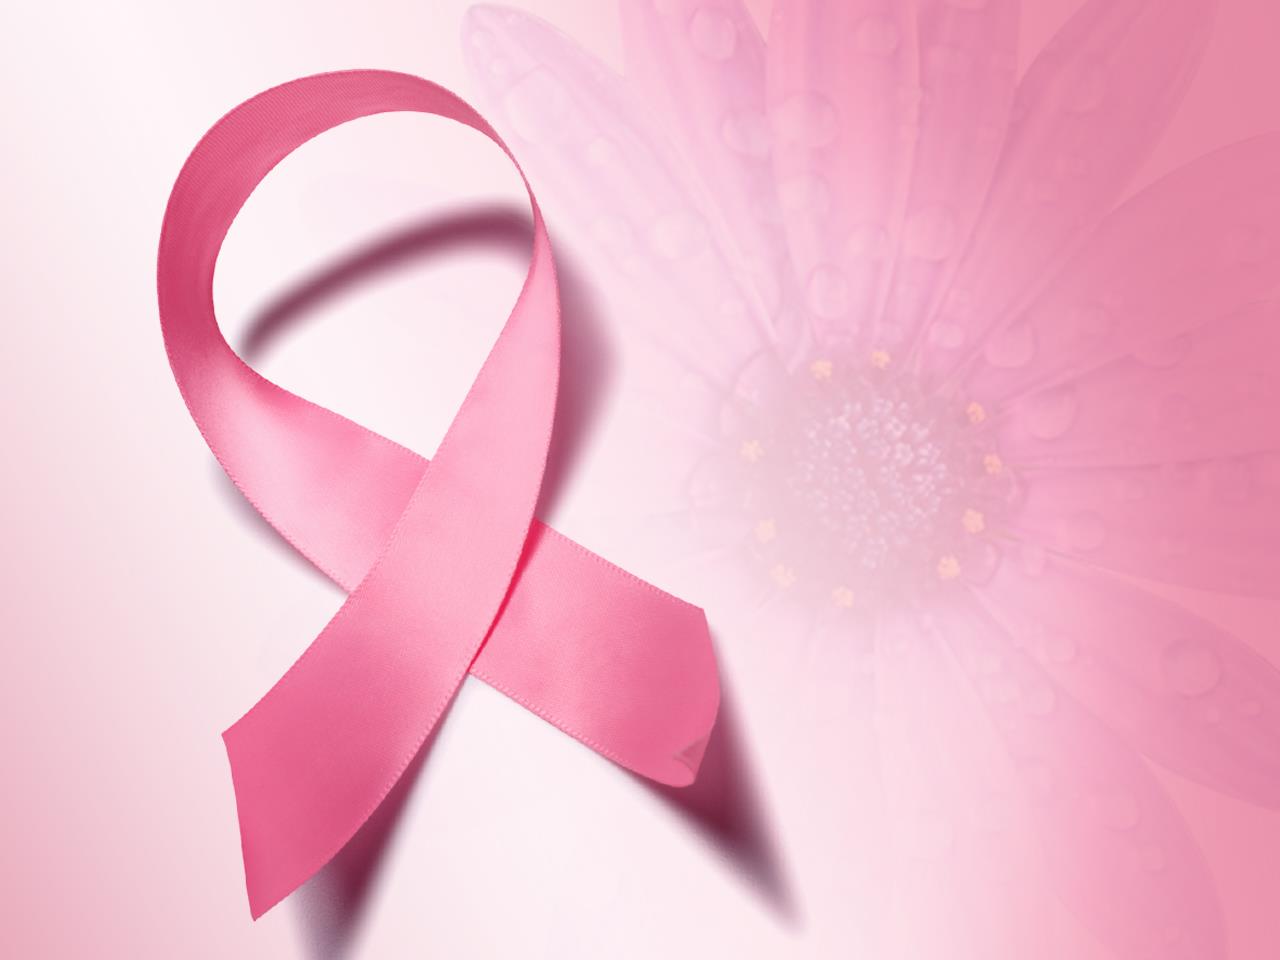 Breast cancer survivors not always clear about follow up care